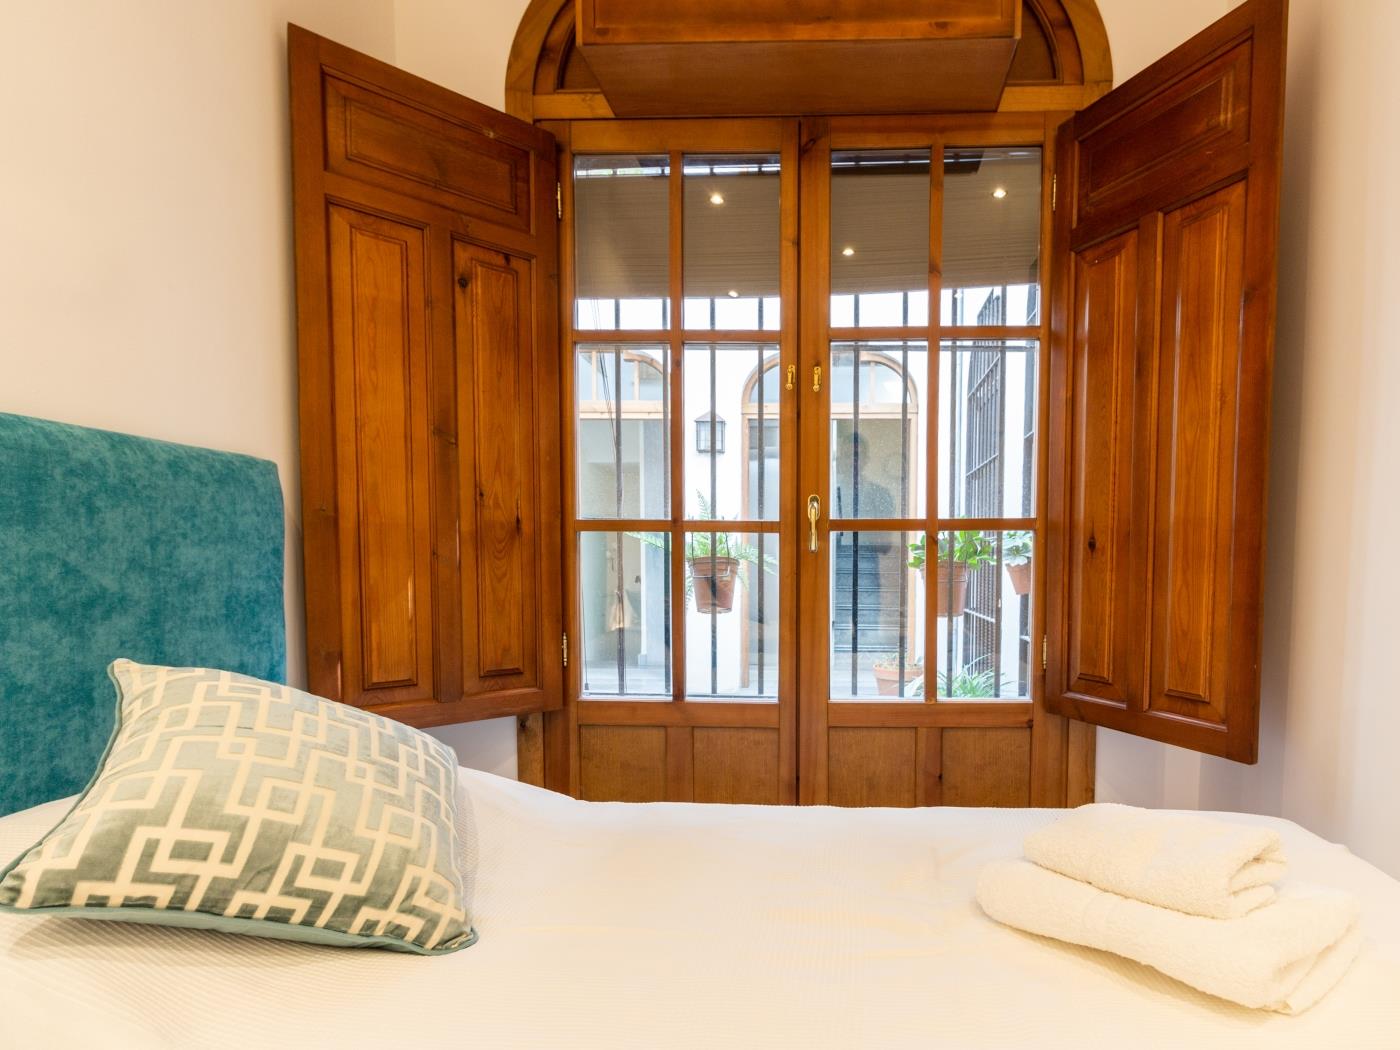 Apto Catedral. Lovely apartment with the best location in Central Granada. in Granada